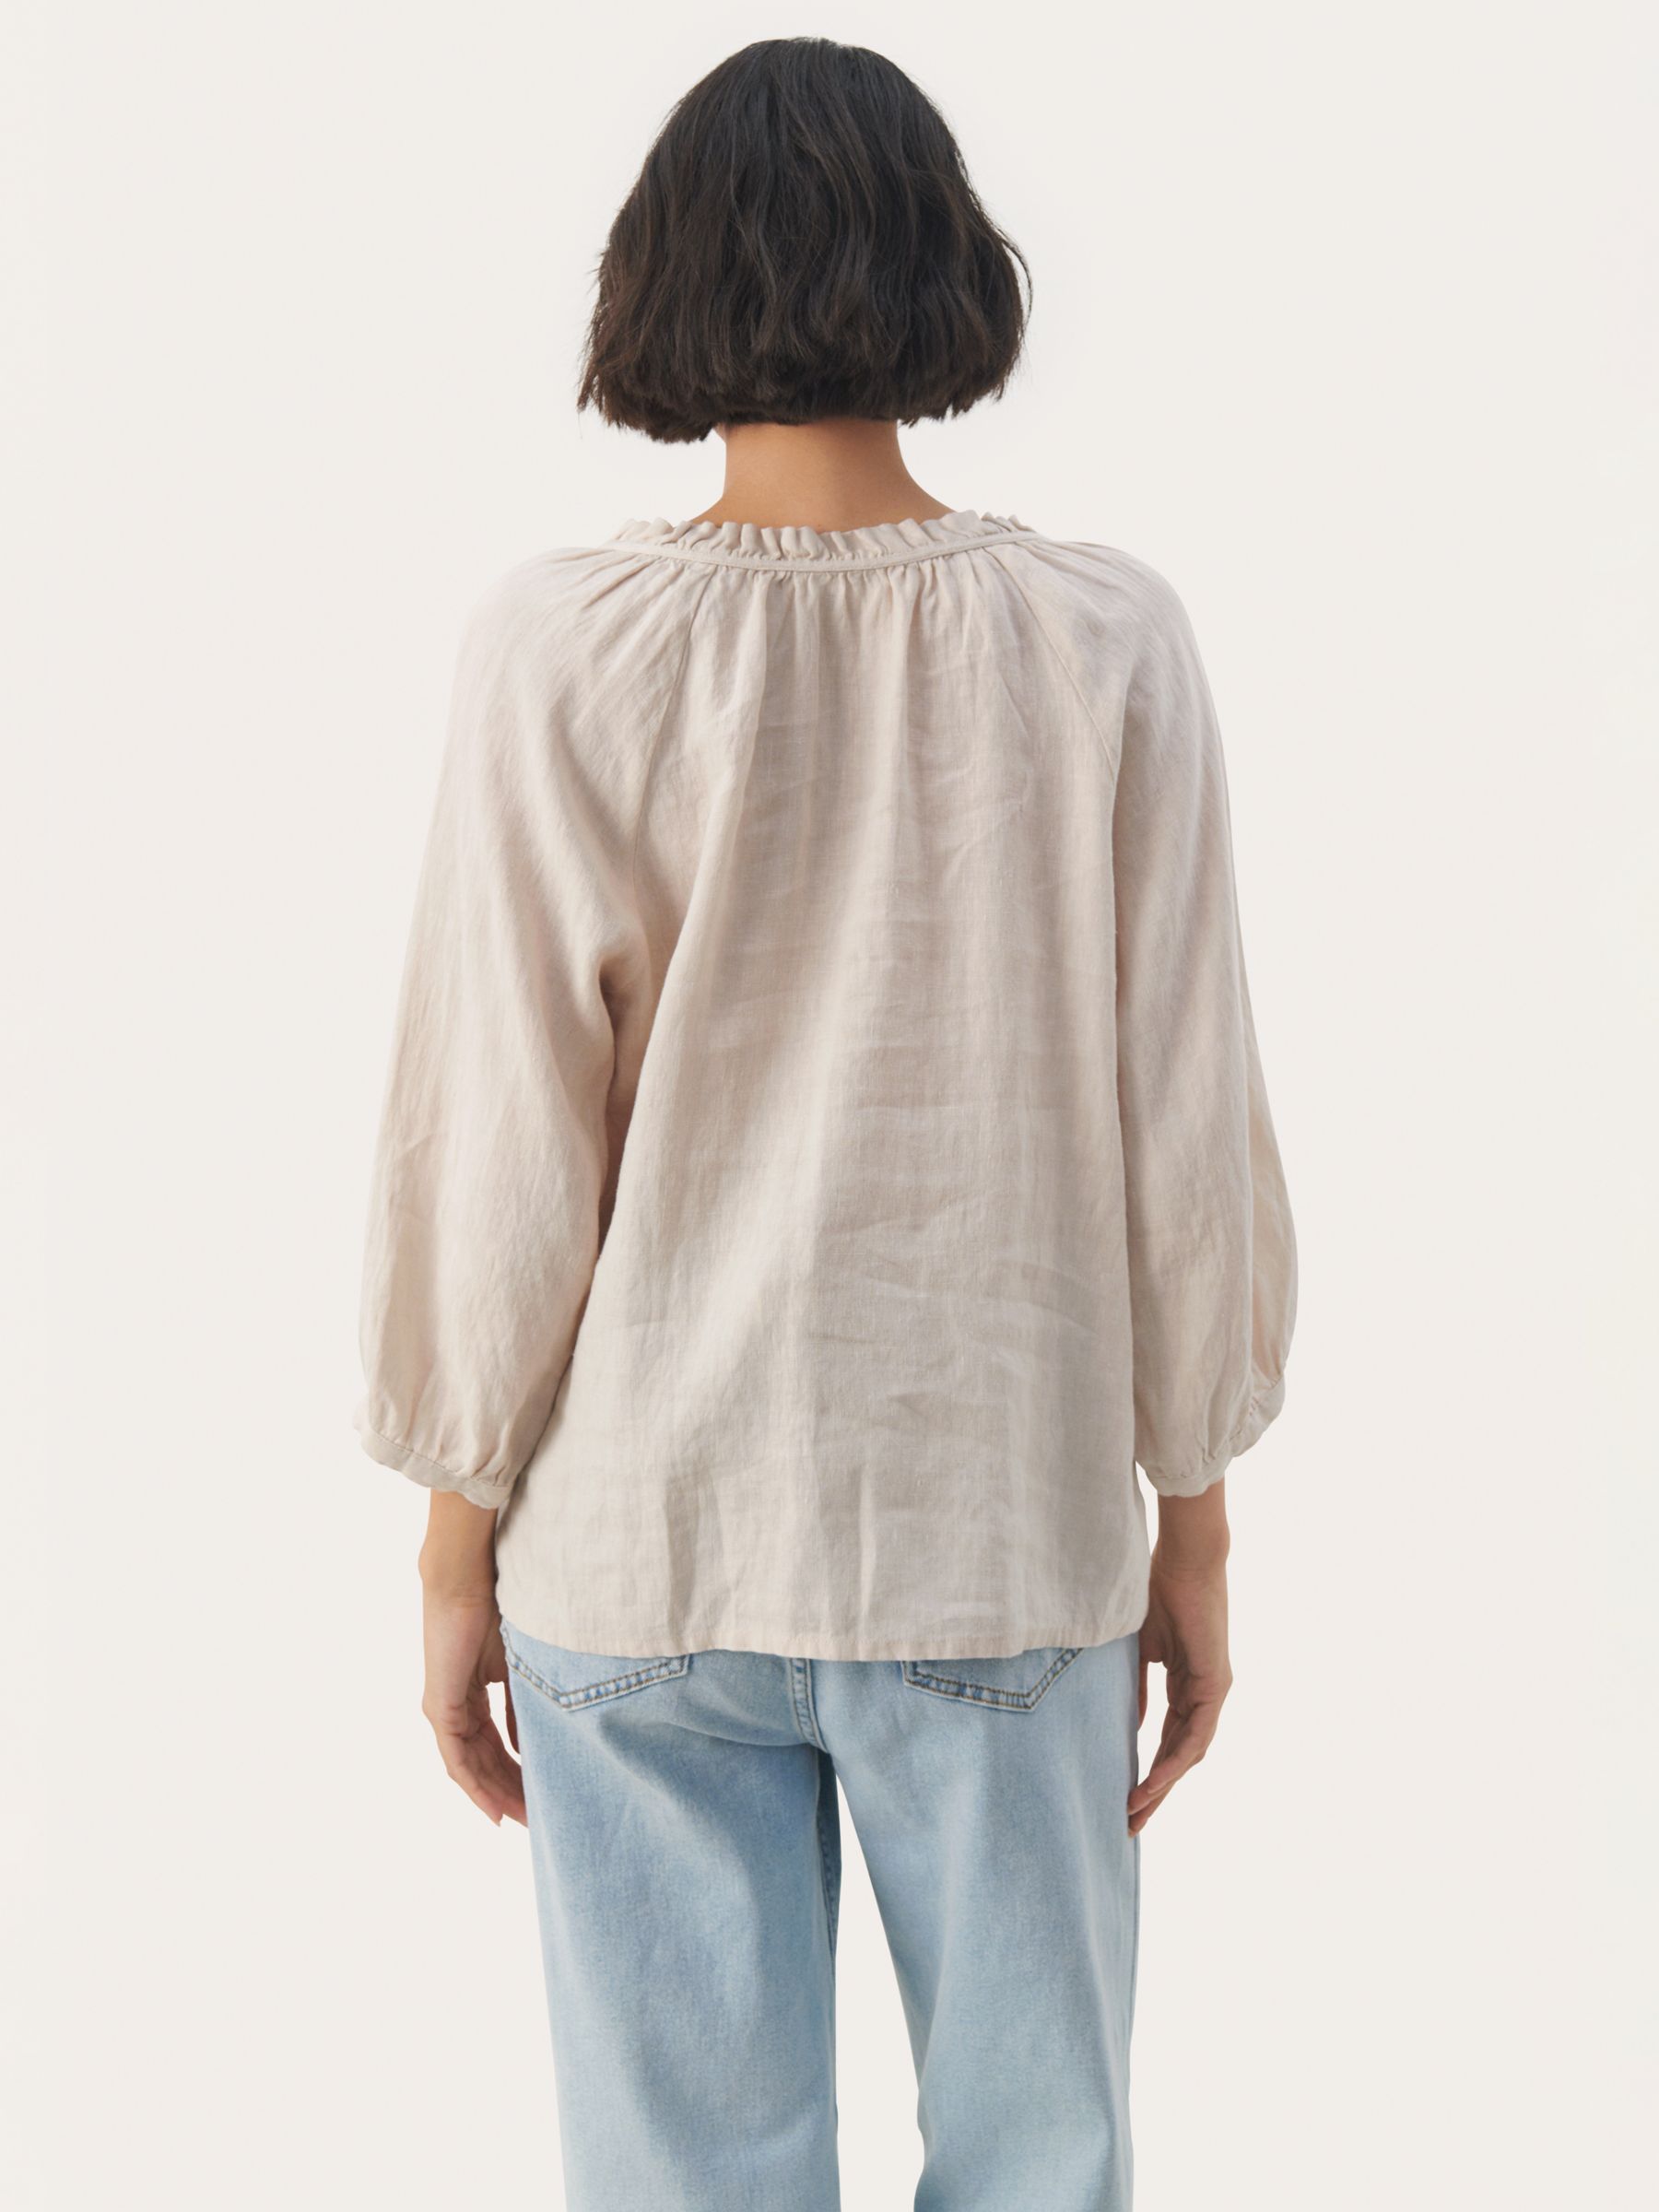 Buy Part Two Elody Linen Blouse Online at johnlewis.com